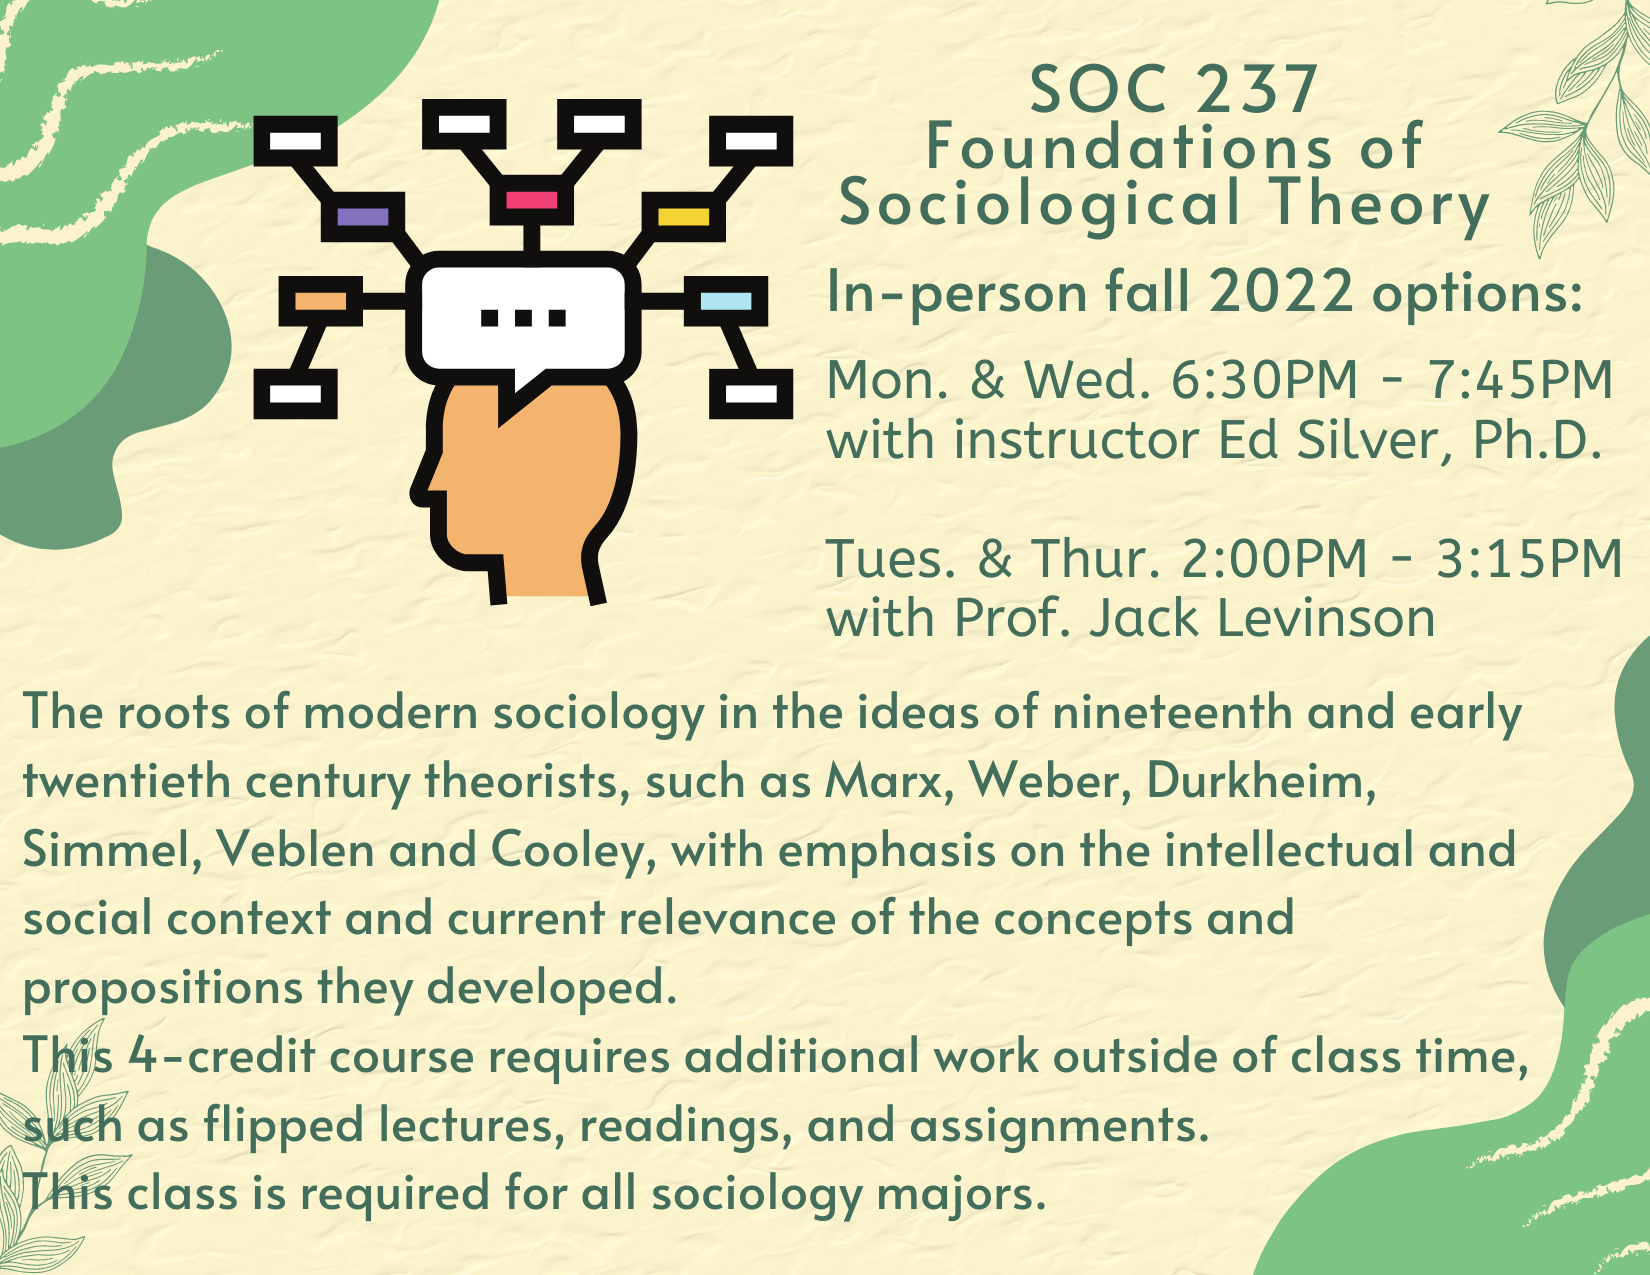 Foundations of Sociological Theory Course Description